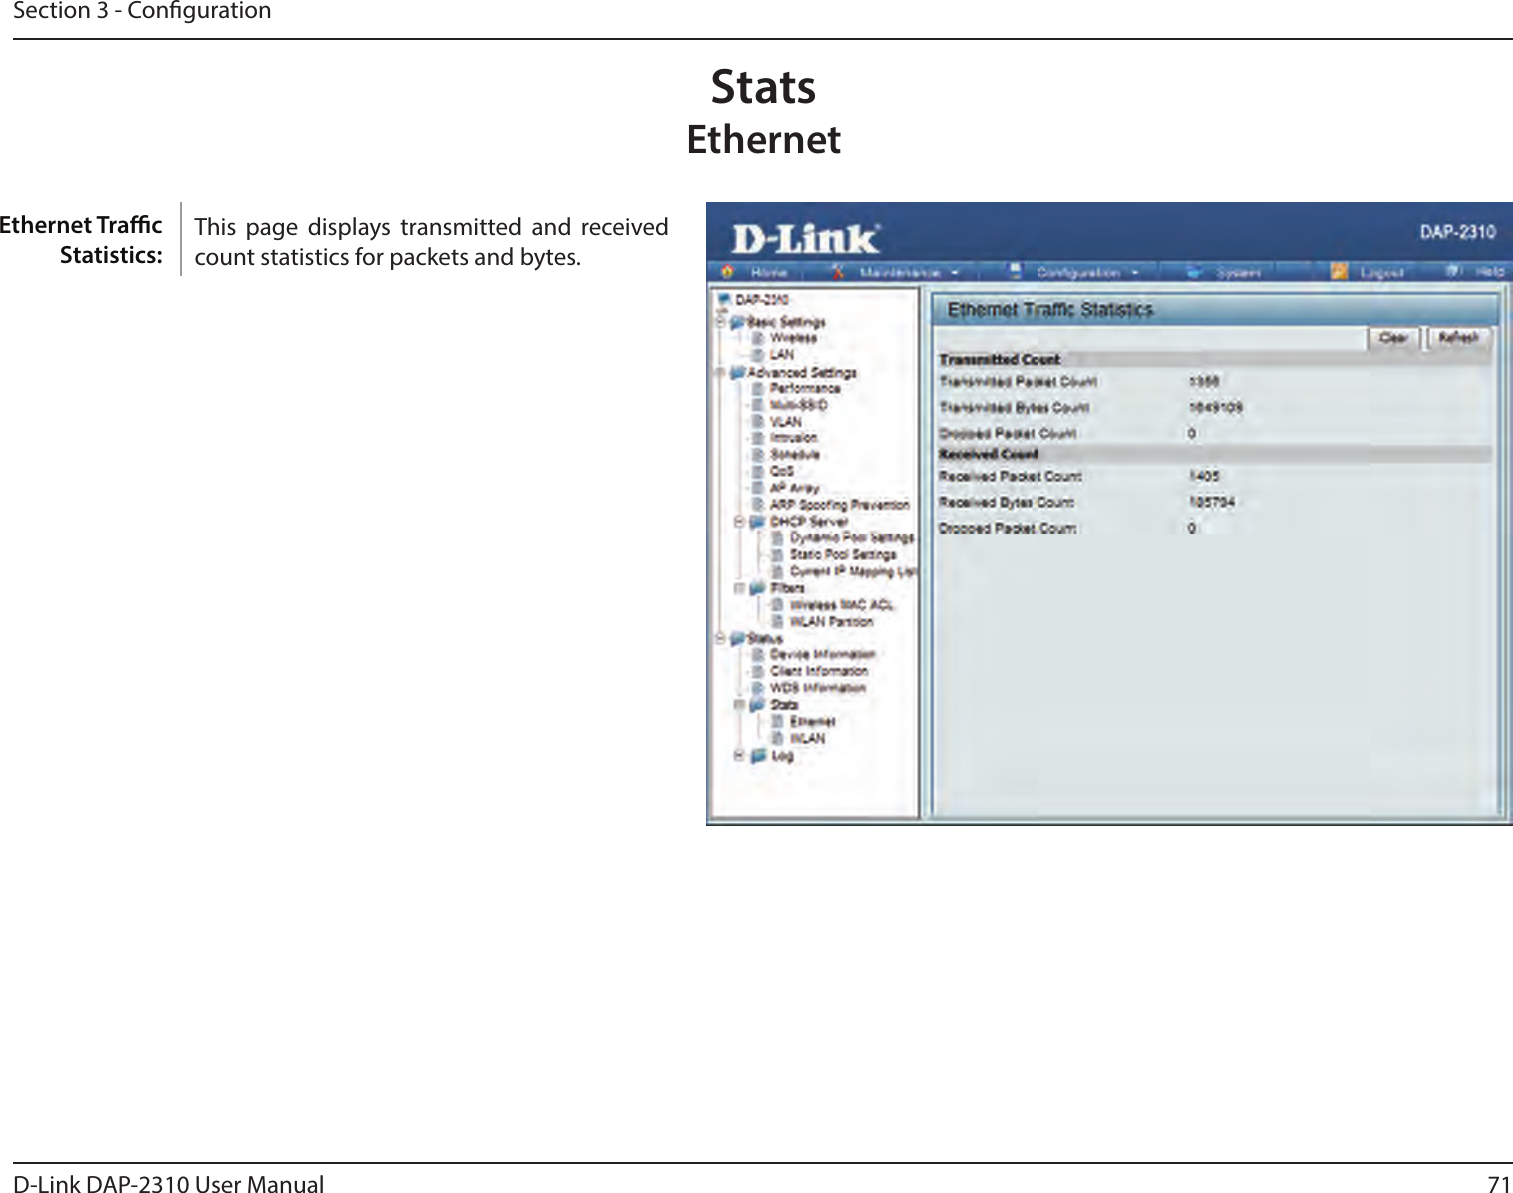 71D-Link DAP-2310 User ManualSection 3 - CongurationStatsEthernetThis  page  displays  transmitted  and  received count statistics for packets and bytes.Ethernet Trac Statistics: